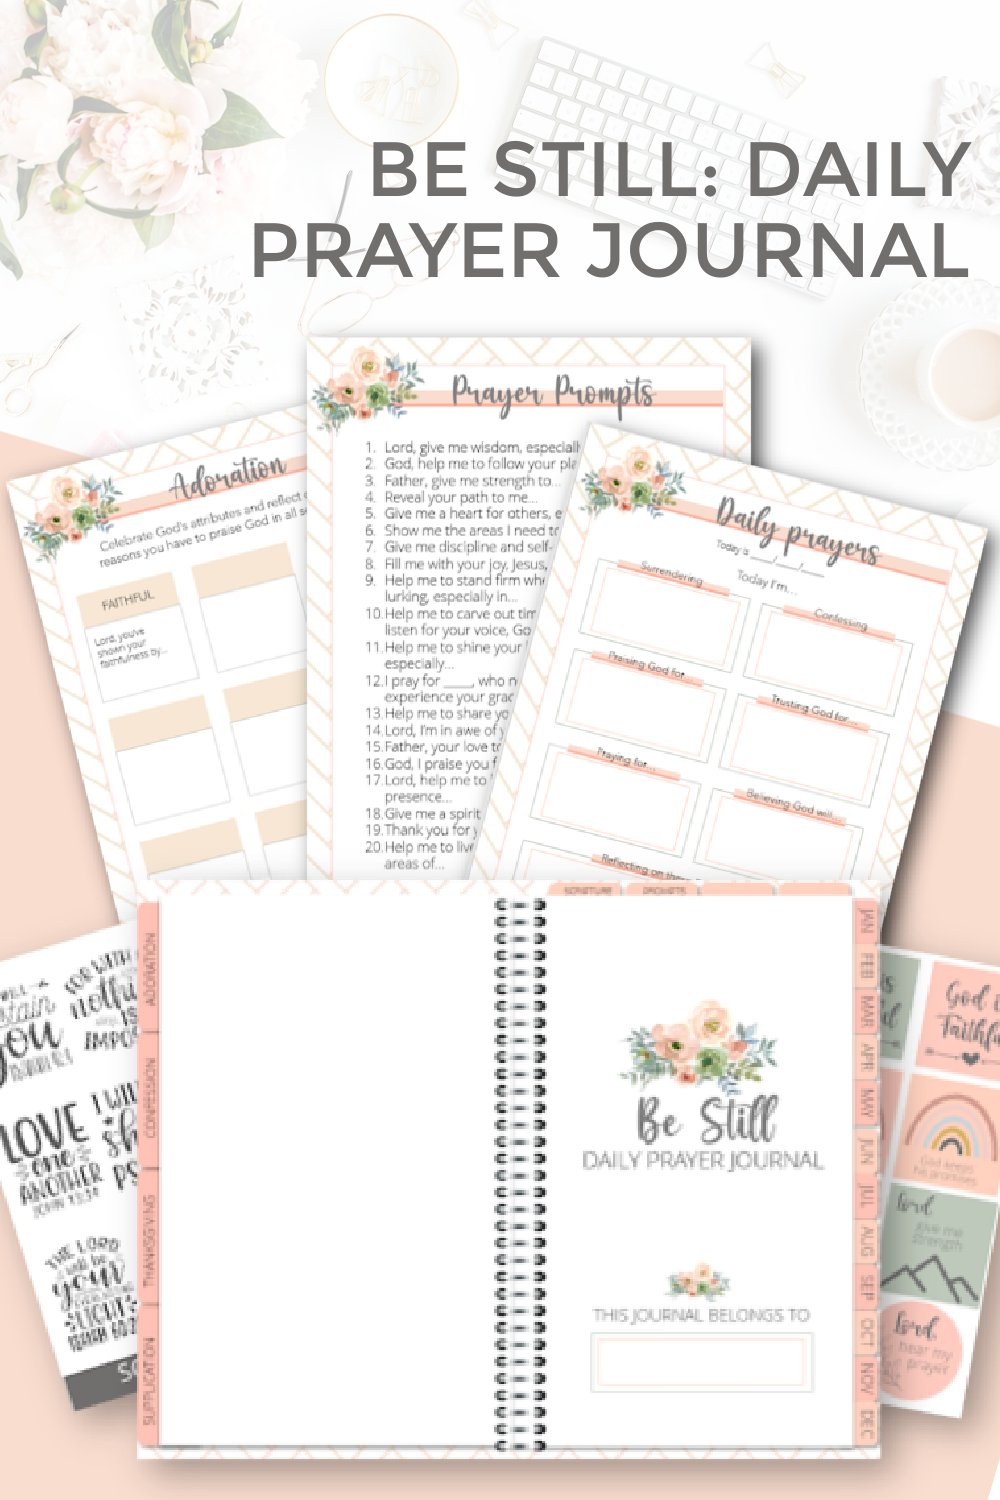 Free Christian Digital Stickers for Goodnotes - Bible Study Printables